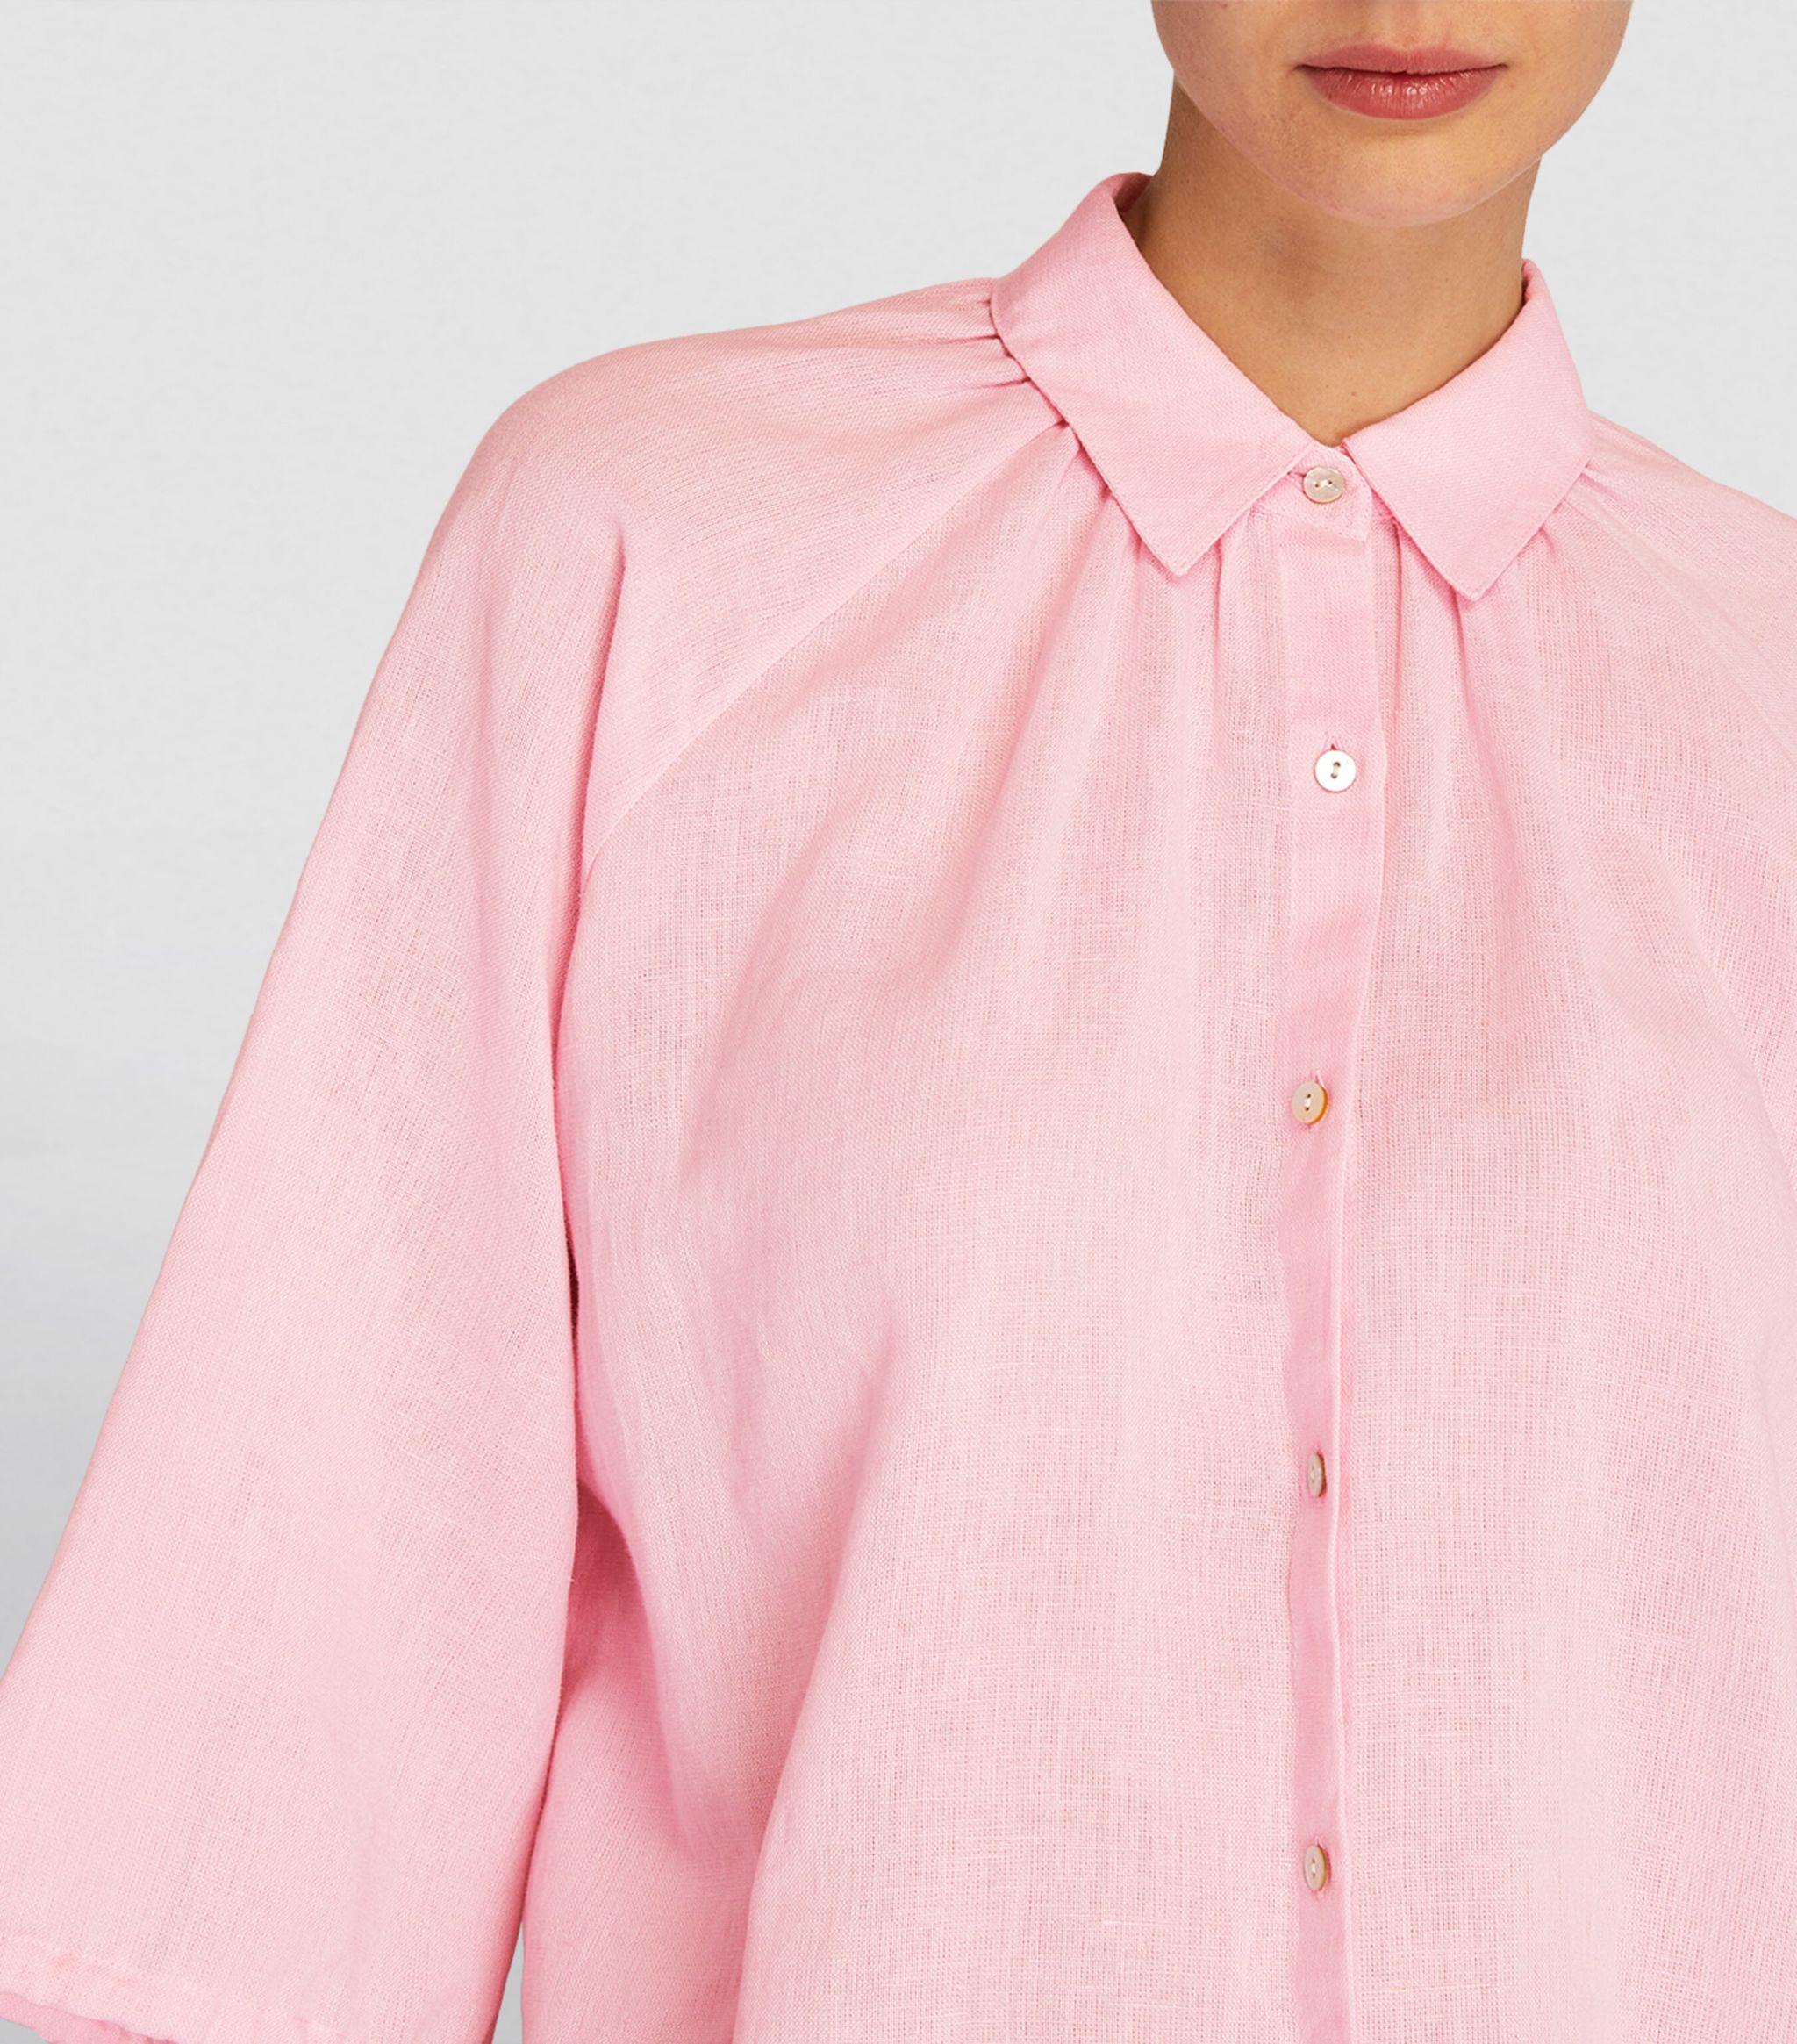 BOTEH La Ponche Shirt In White in Pink